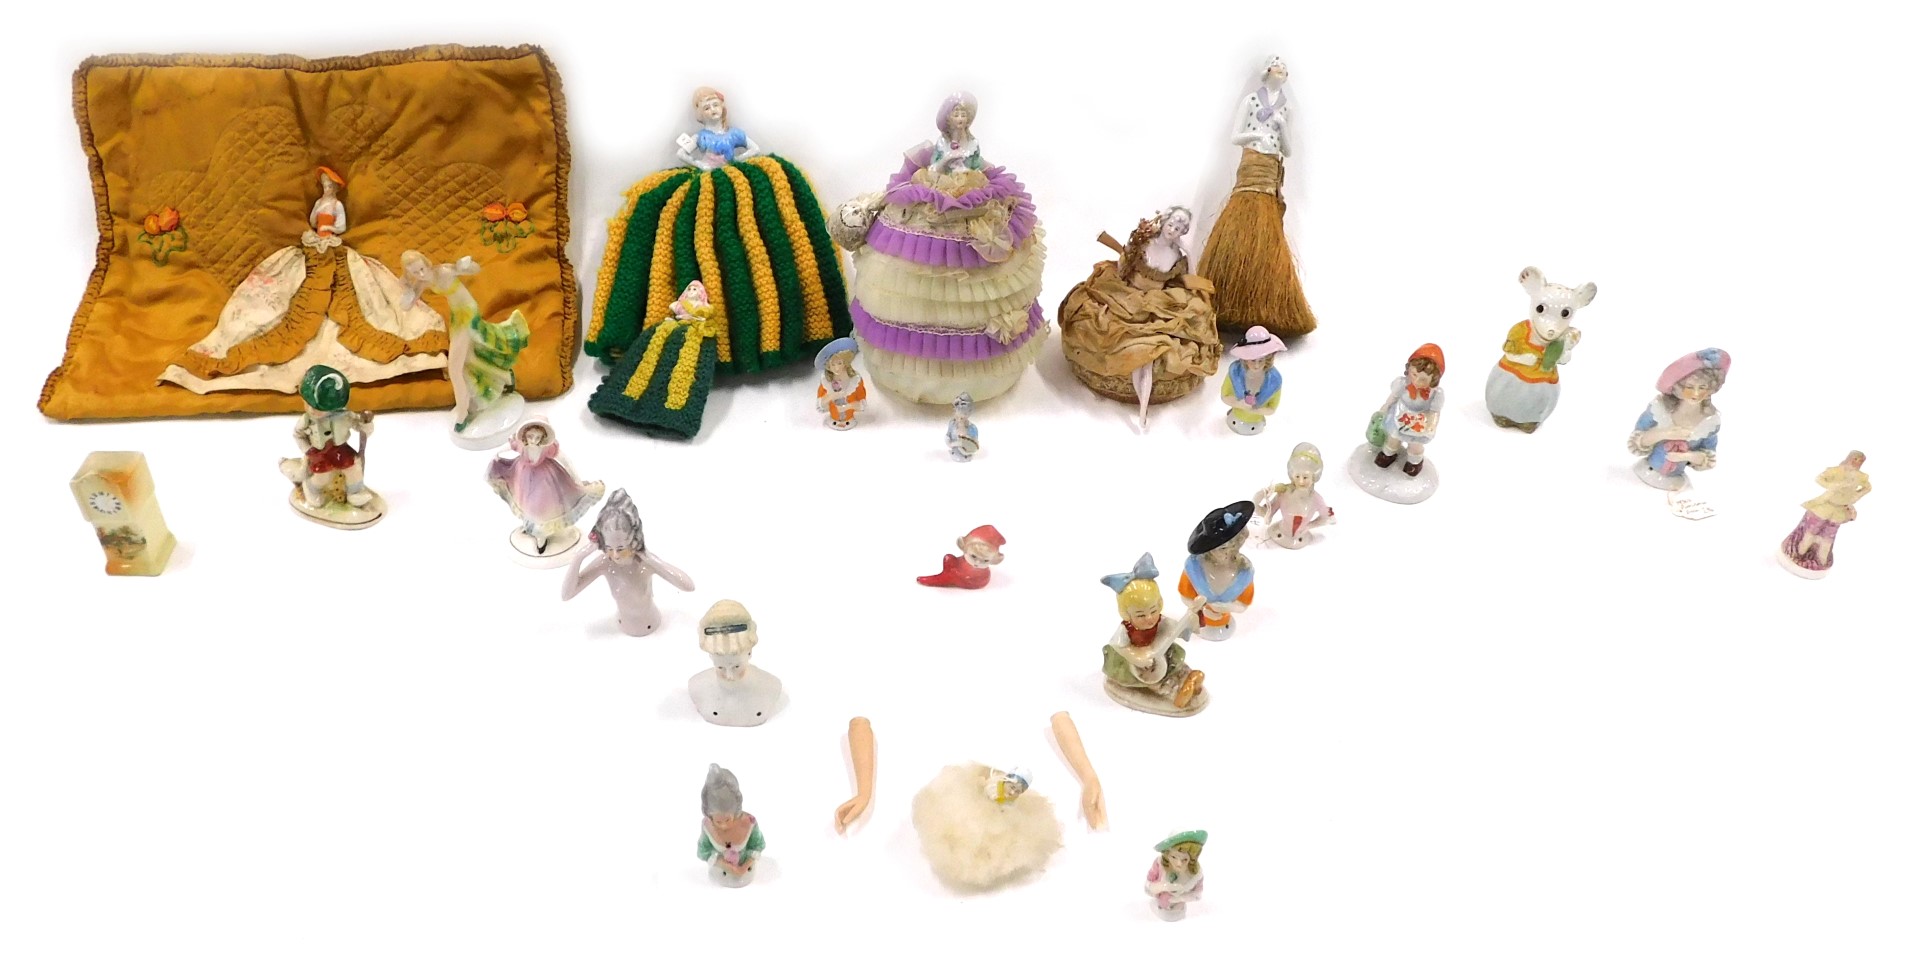 An early 20thC pin cushion doll and various other similar dolls, etc.